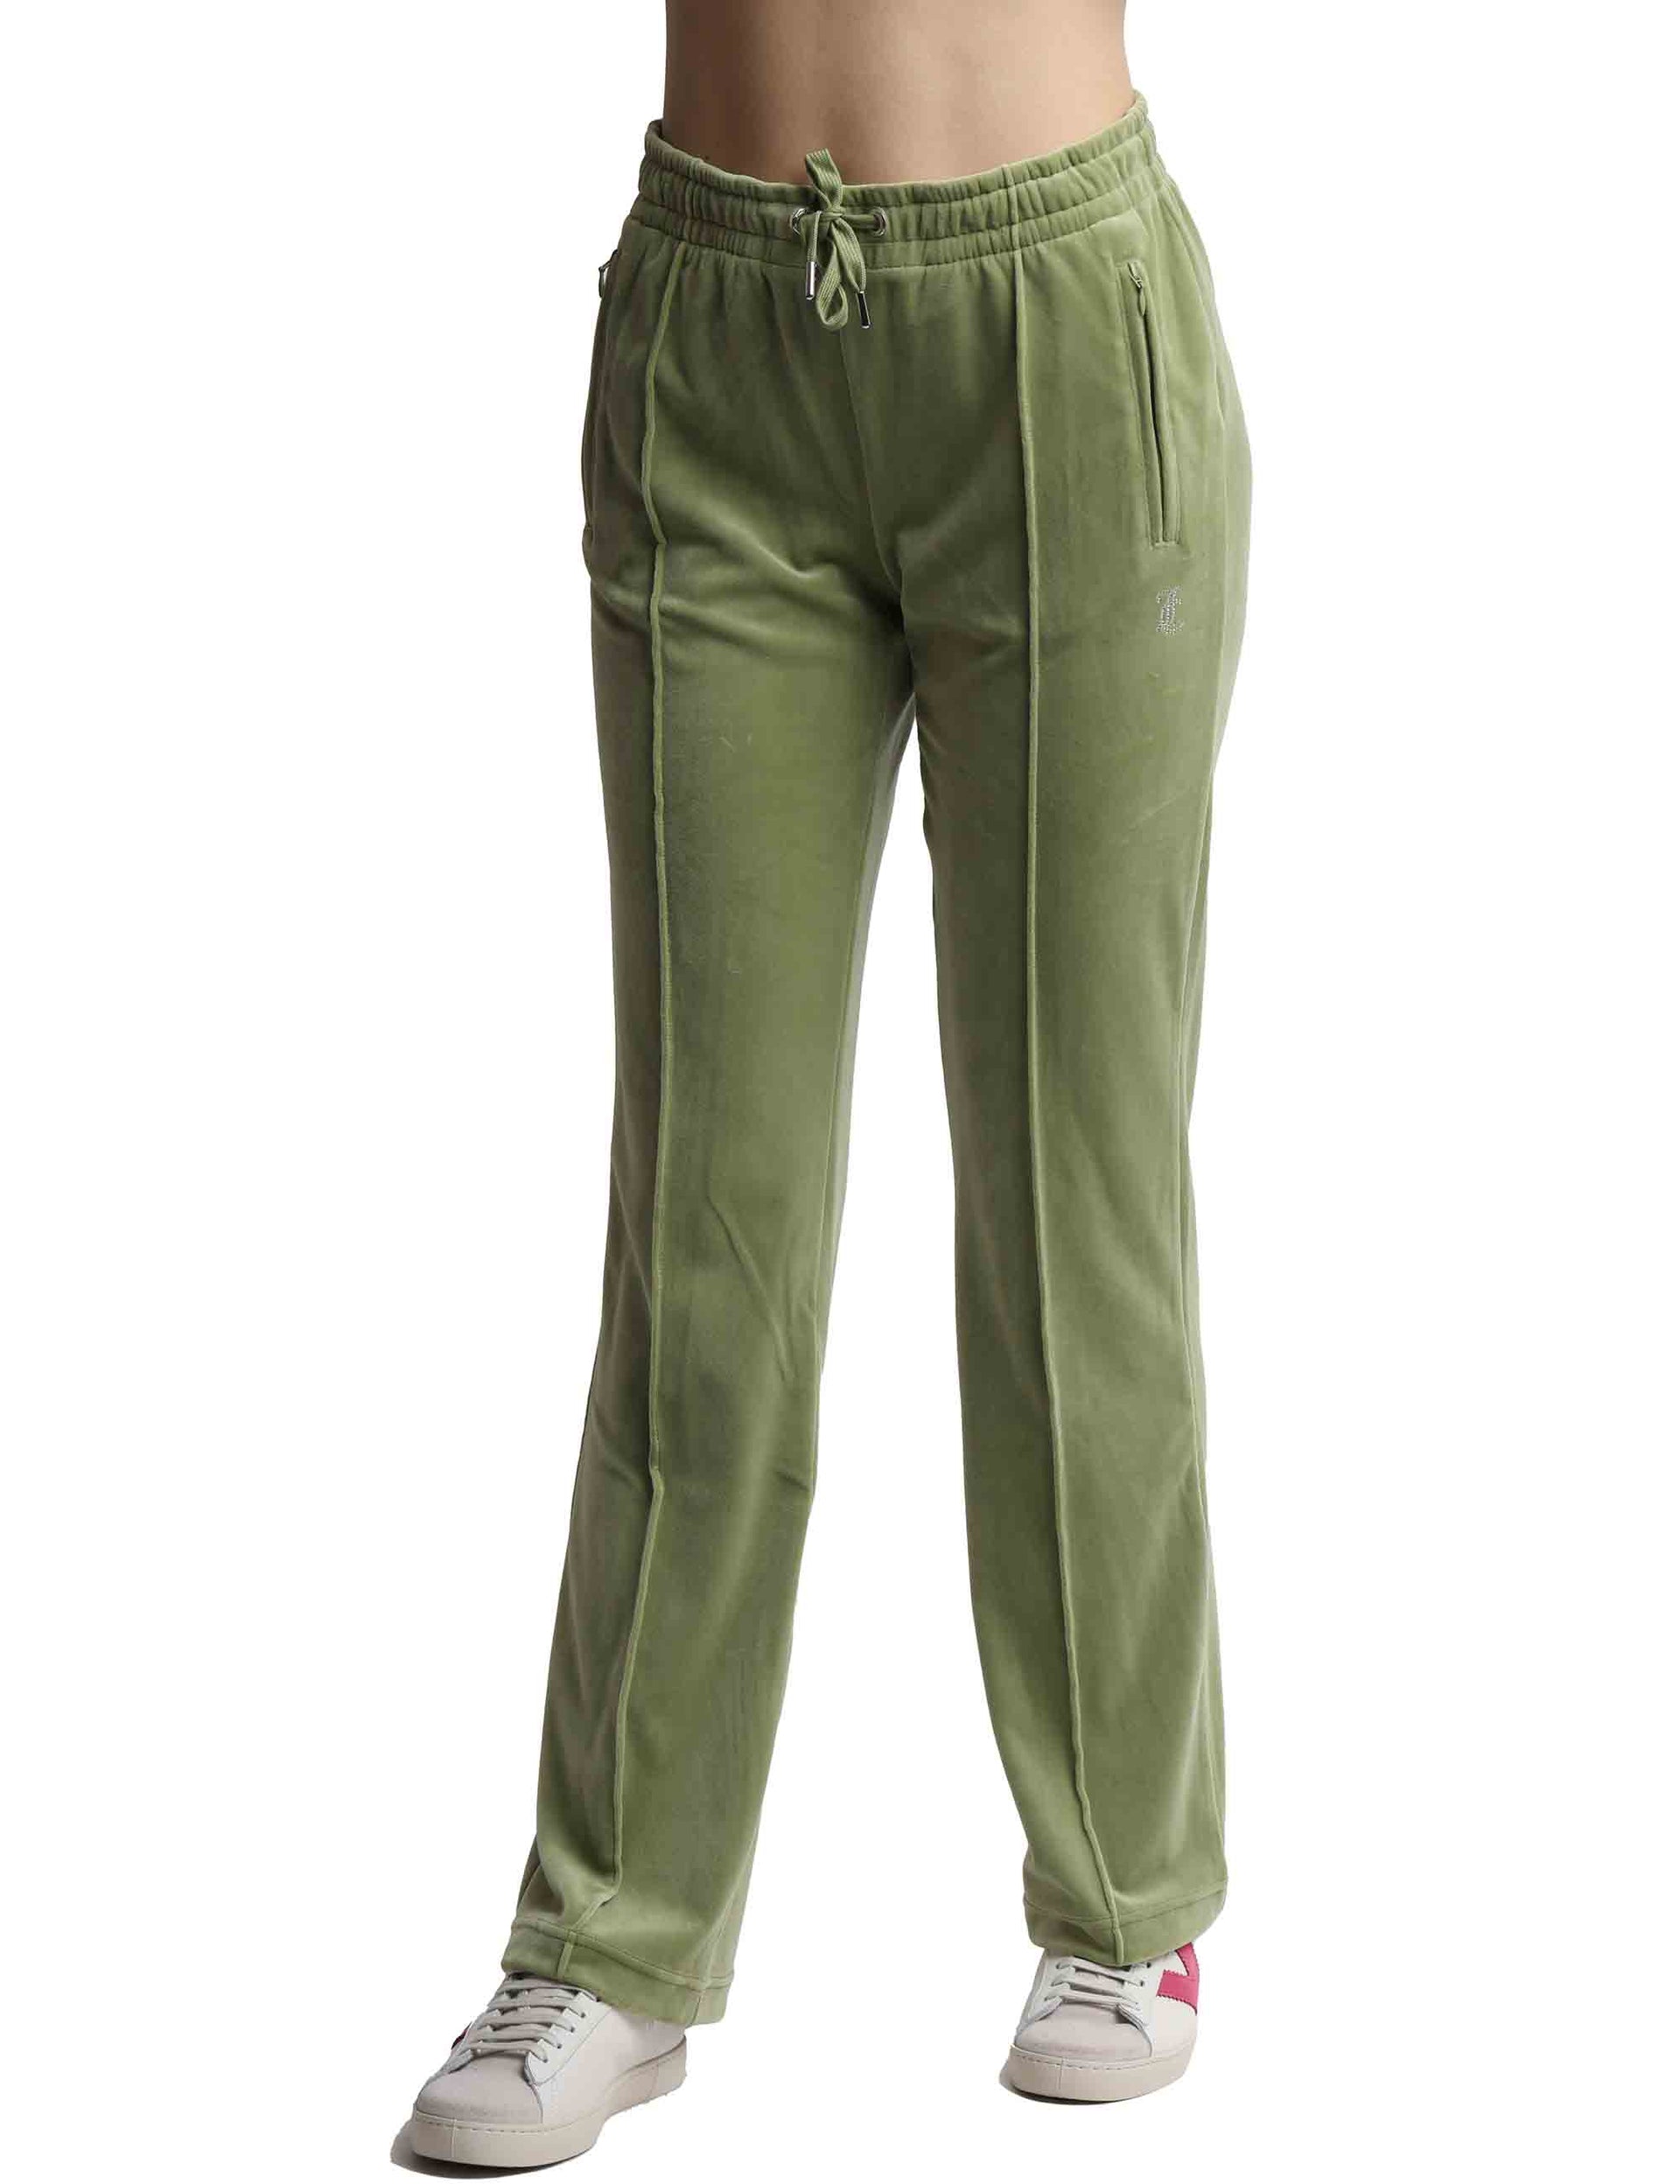 Tina women's tracksuit trousers in green fabric with rhinestones